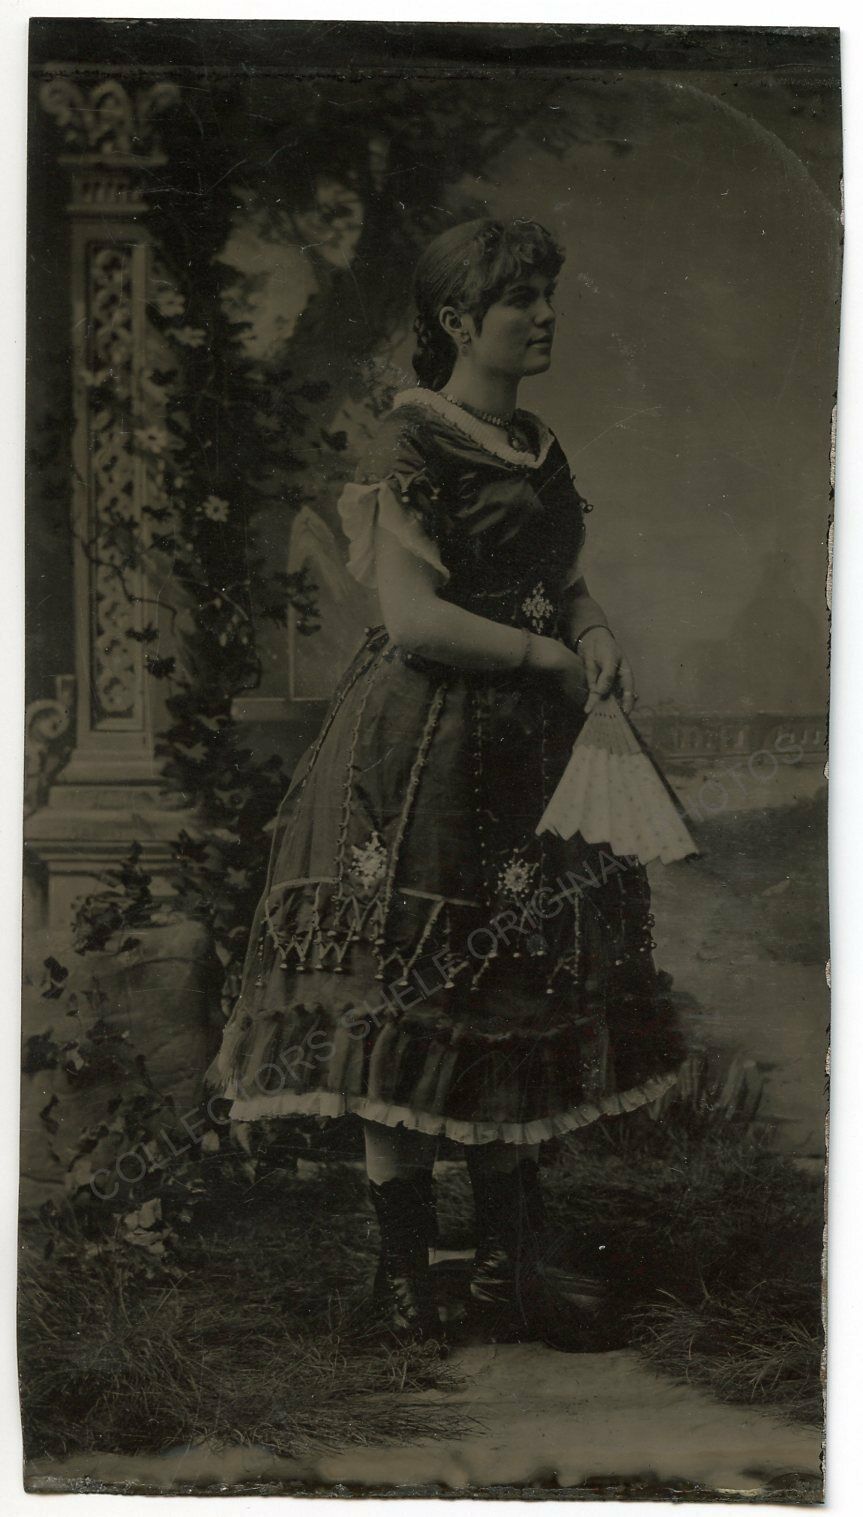 WOMAN in AMAZING SPANISH or MEXICAN GOWN 1880s 1/4 PLATE TINTYPE 2 3/4\